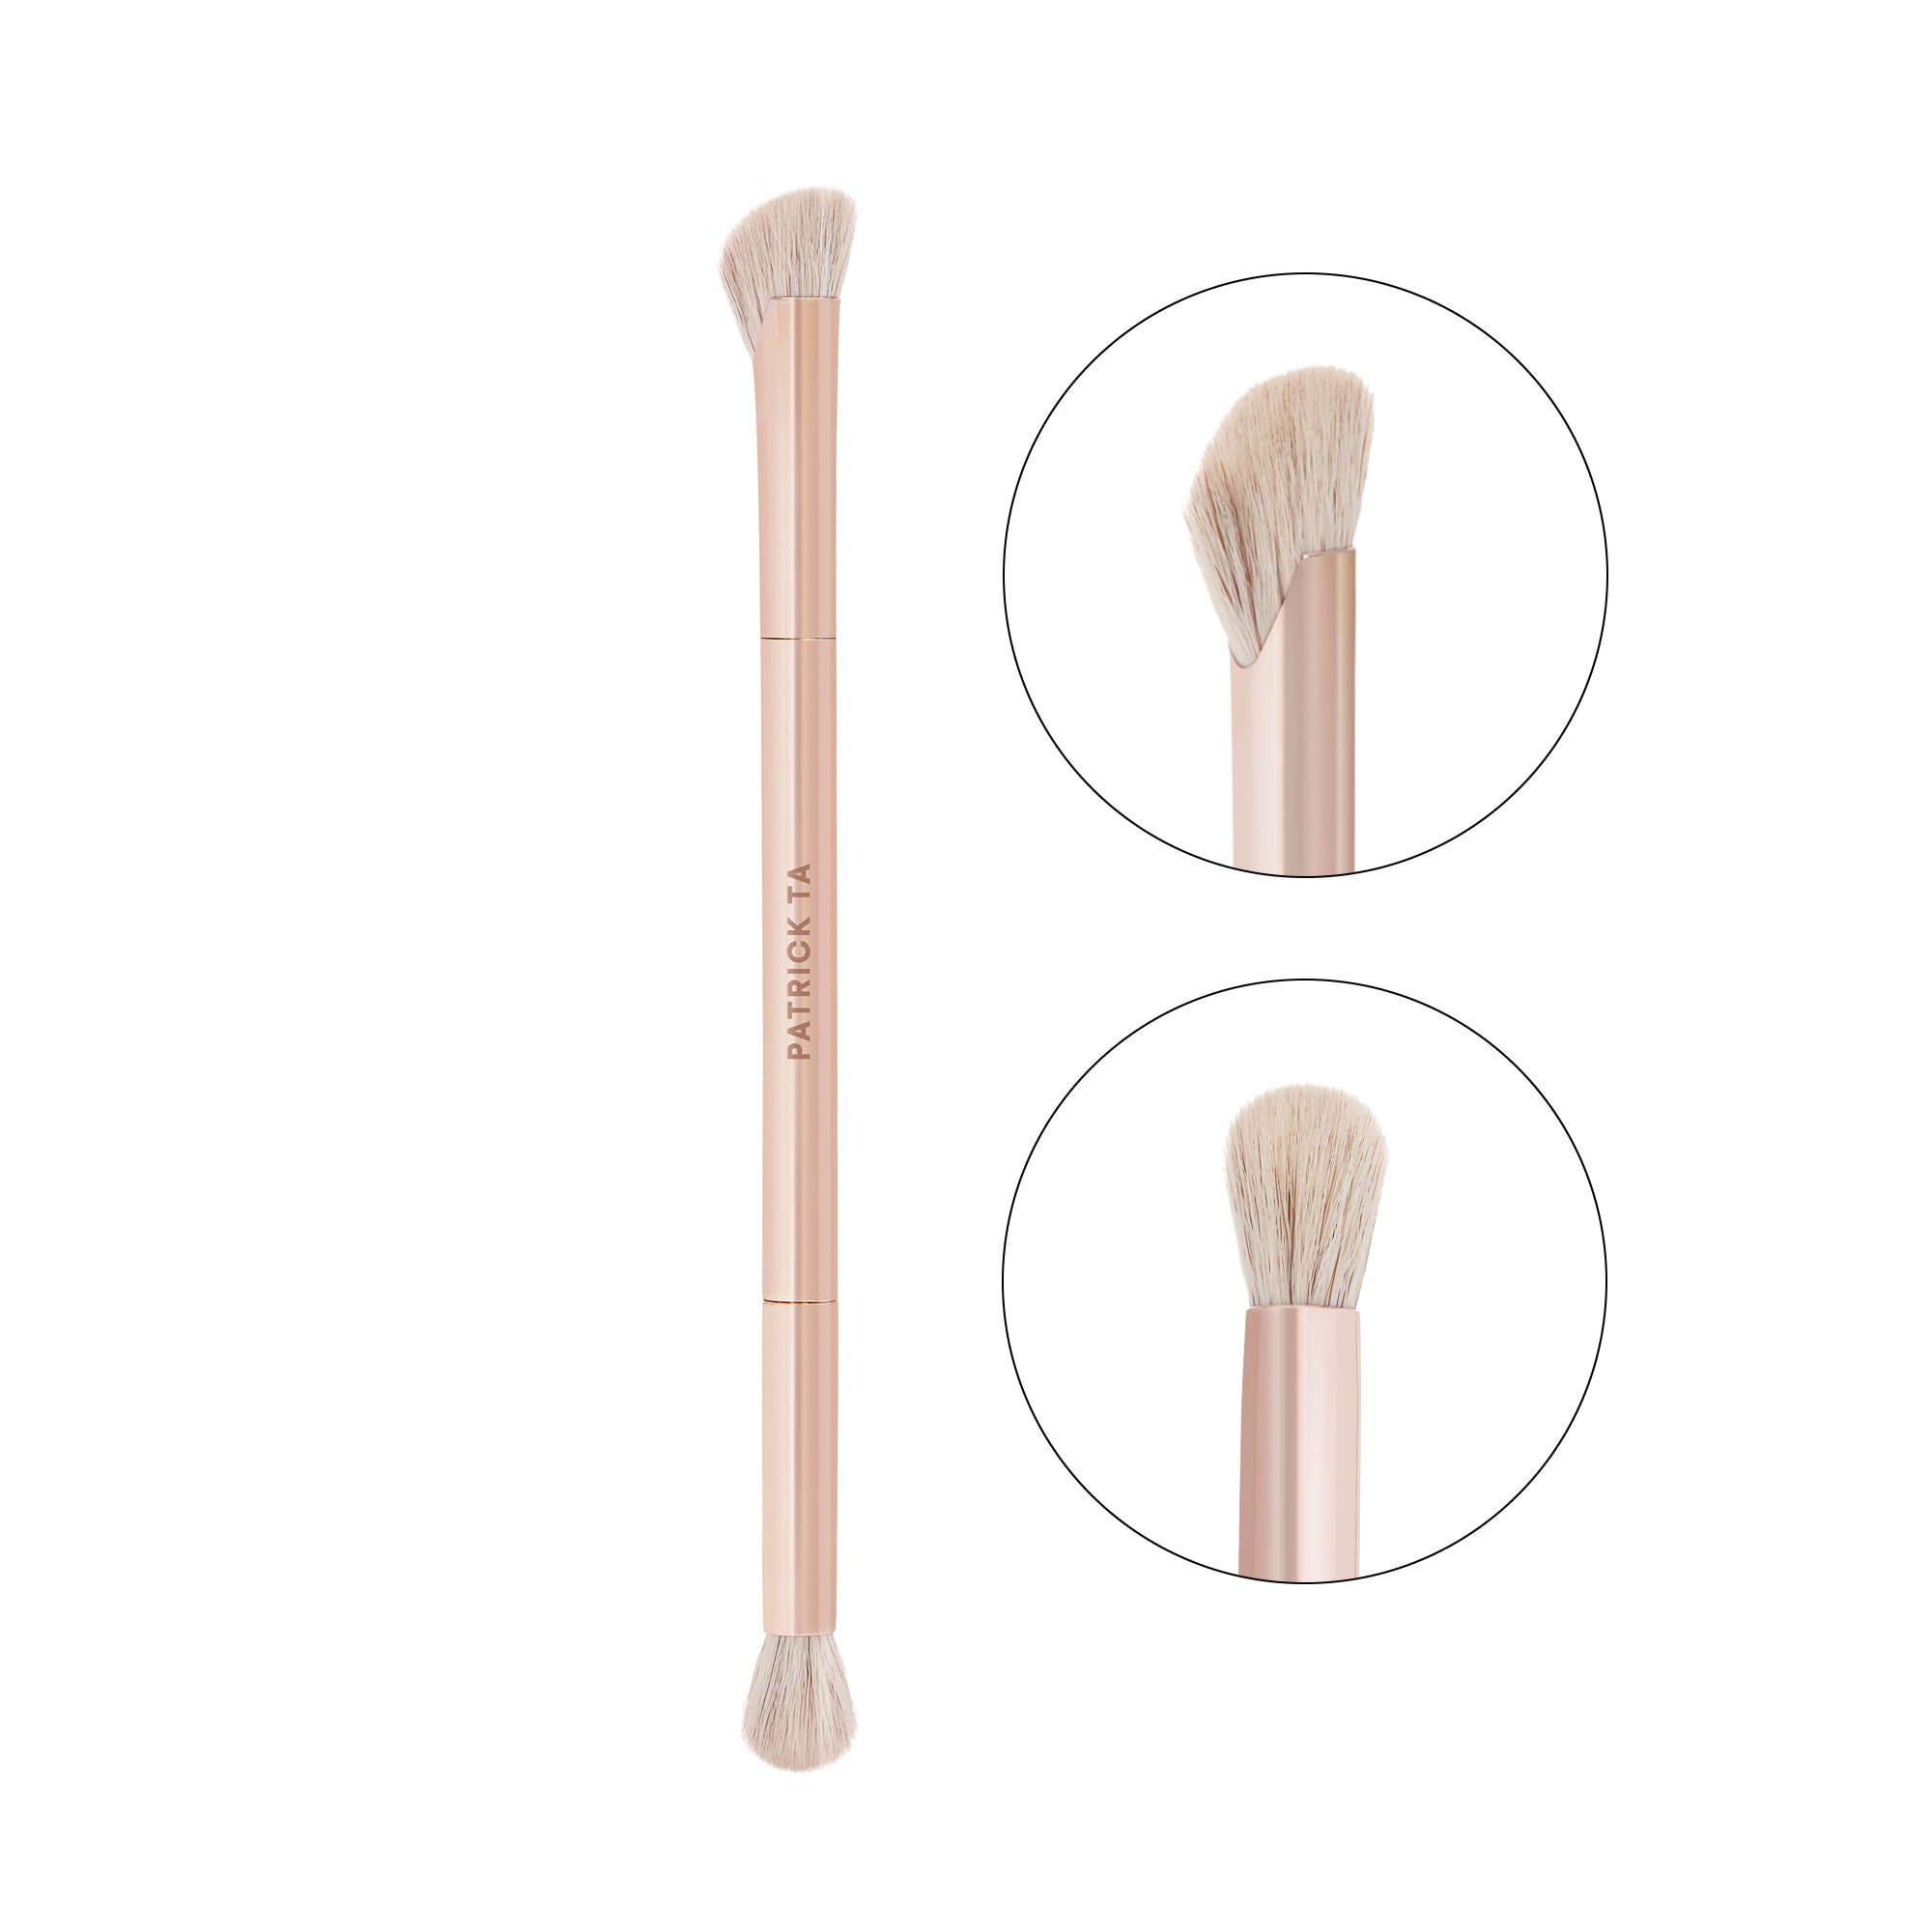 Brush for nose contour? You read that right, babes! ✨ Our Precision Du